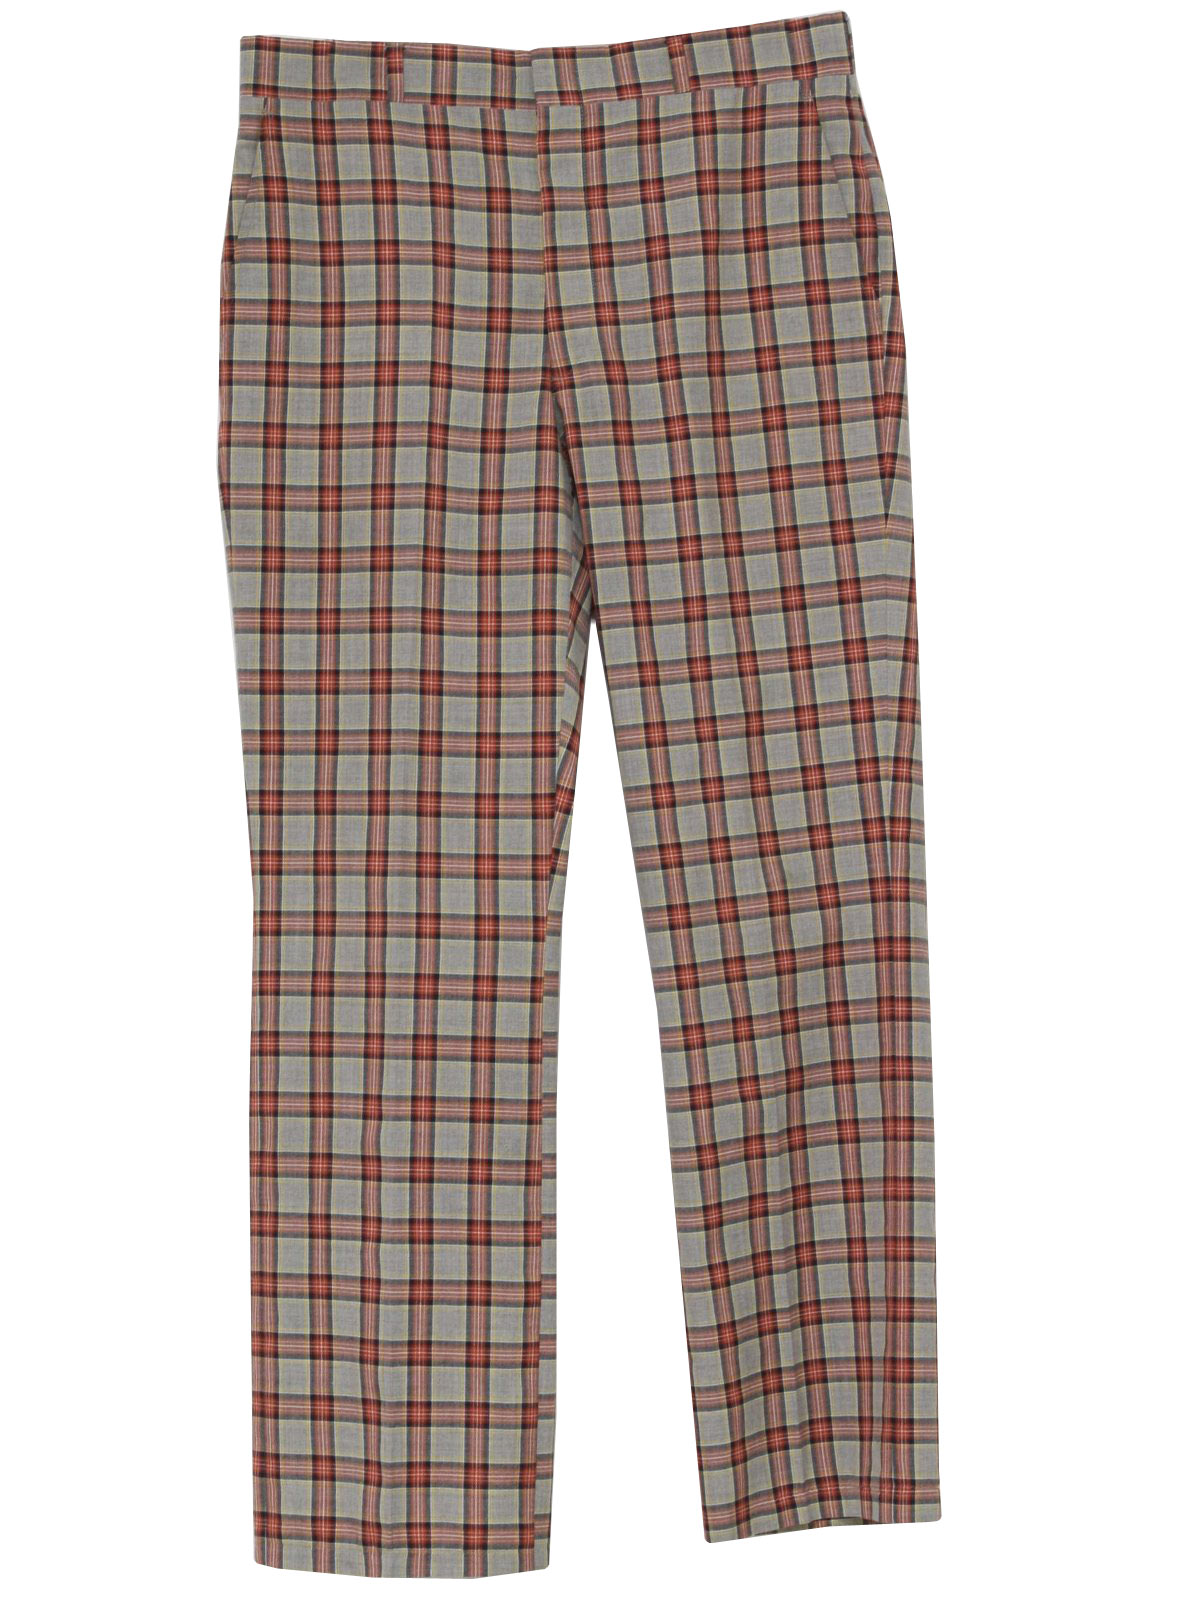 Asher Eighties Vintage Pants: 80s -Asher- Mens heather light gray, red ...